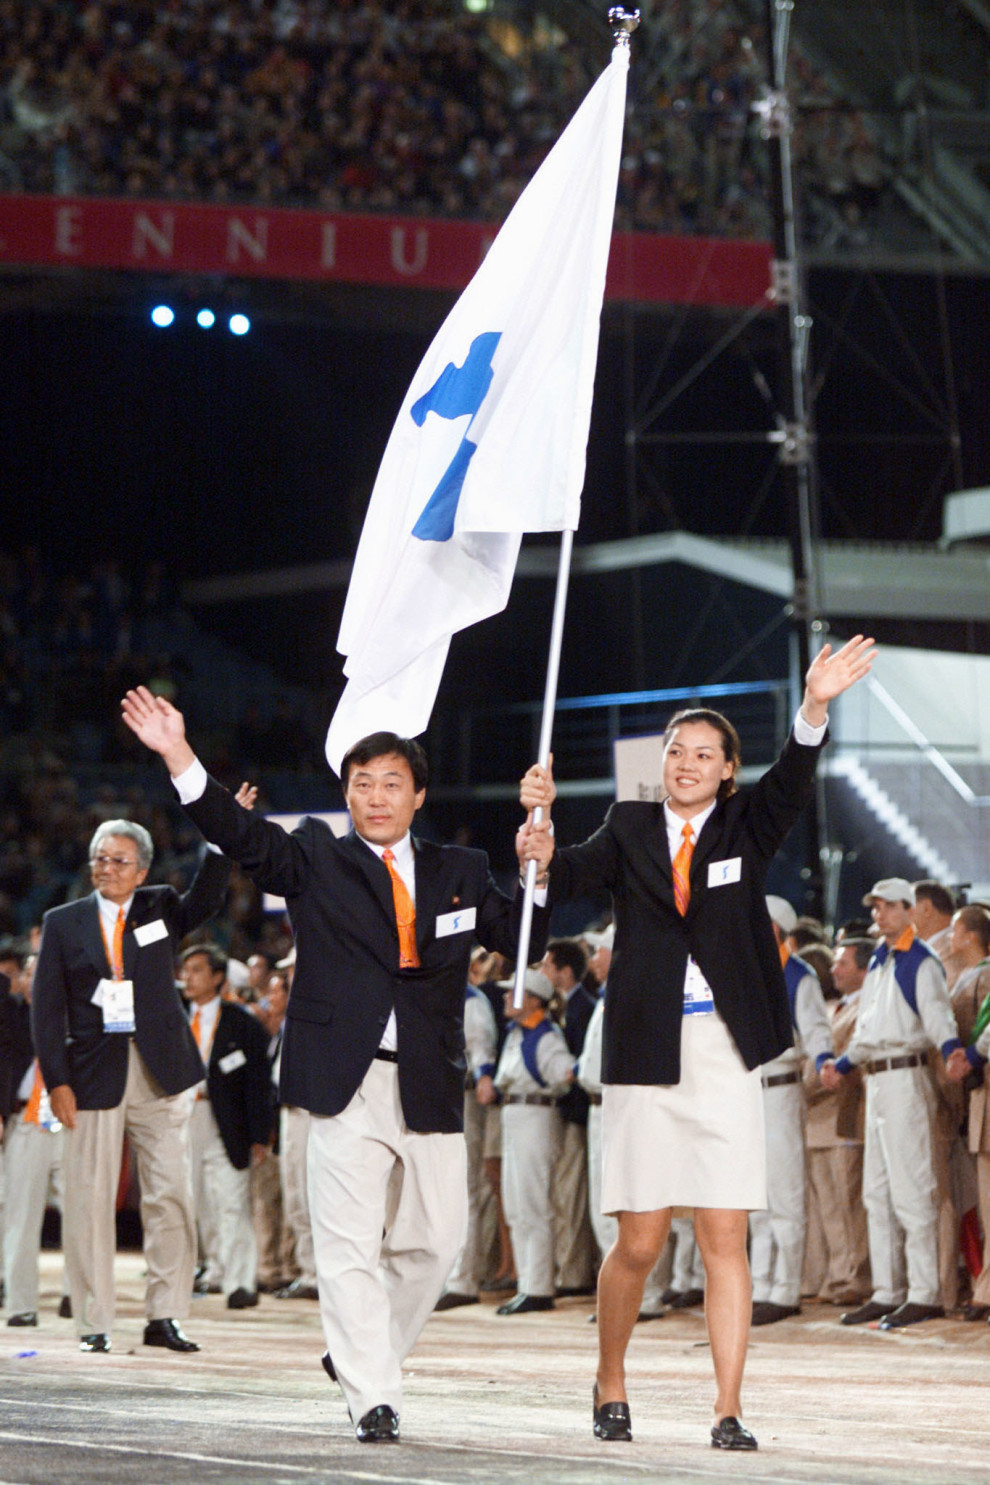 During the Athletes Parade in the opening ceremony of the 2000 Olympic Games in Sydney, Jang Choo Pak of North Korea and Eun-Soon Chung of South Korea walked hand in hand carrying a special flag depicting the Korean peninsula — a gesture of peace and unification never before shown between the two feuding nations.